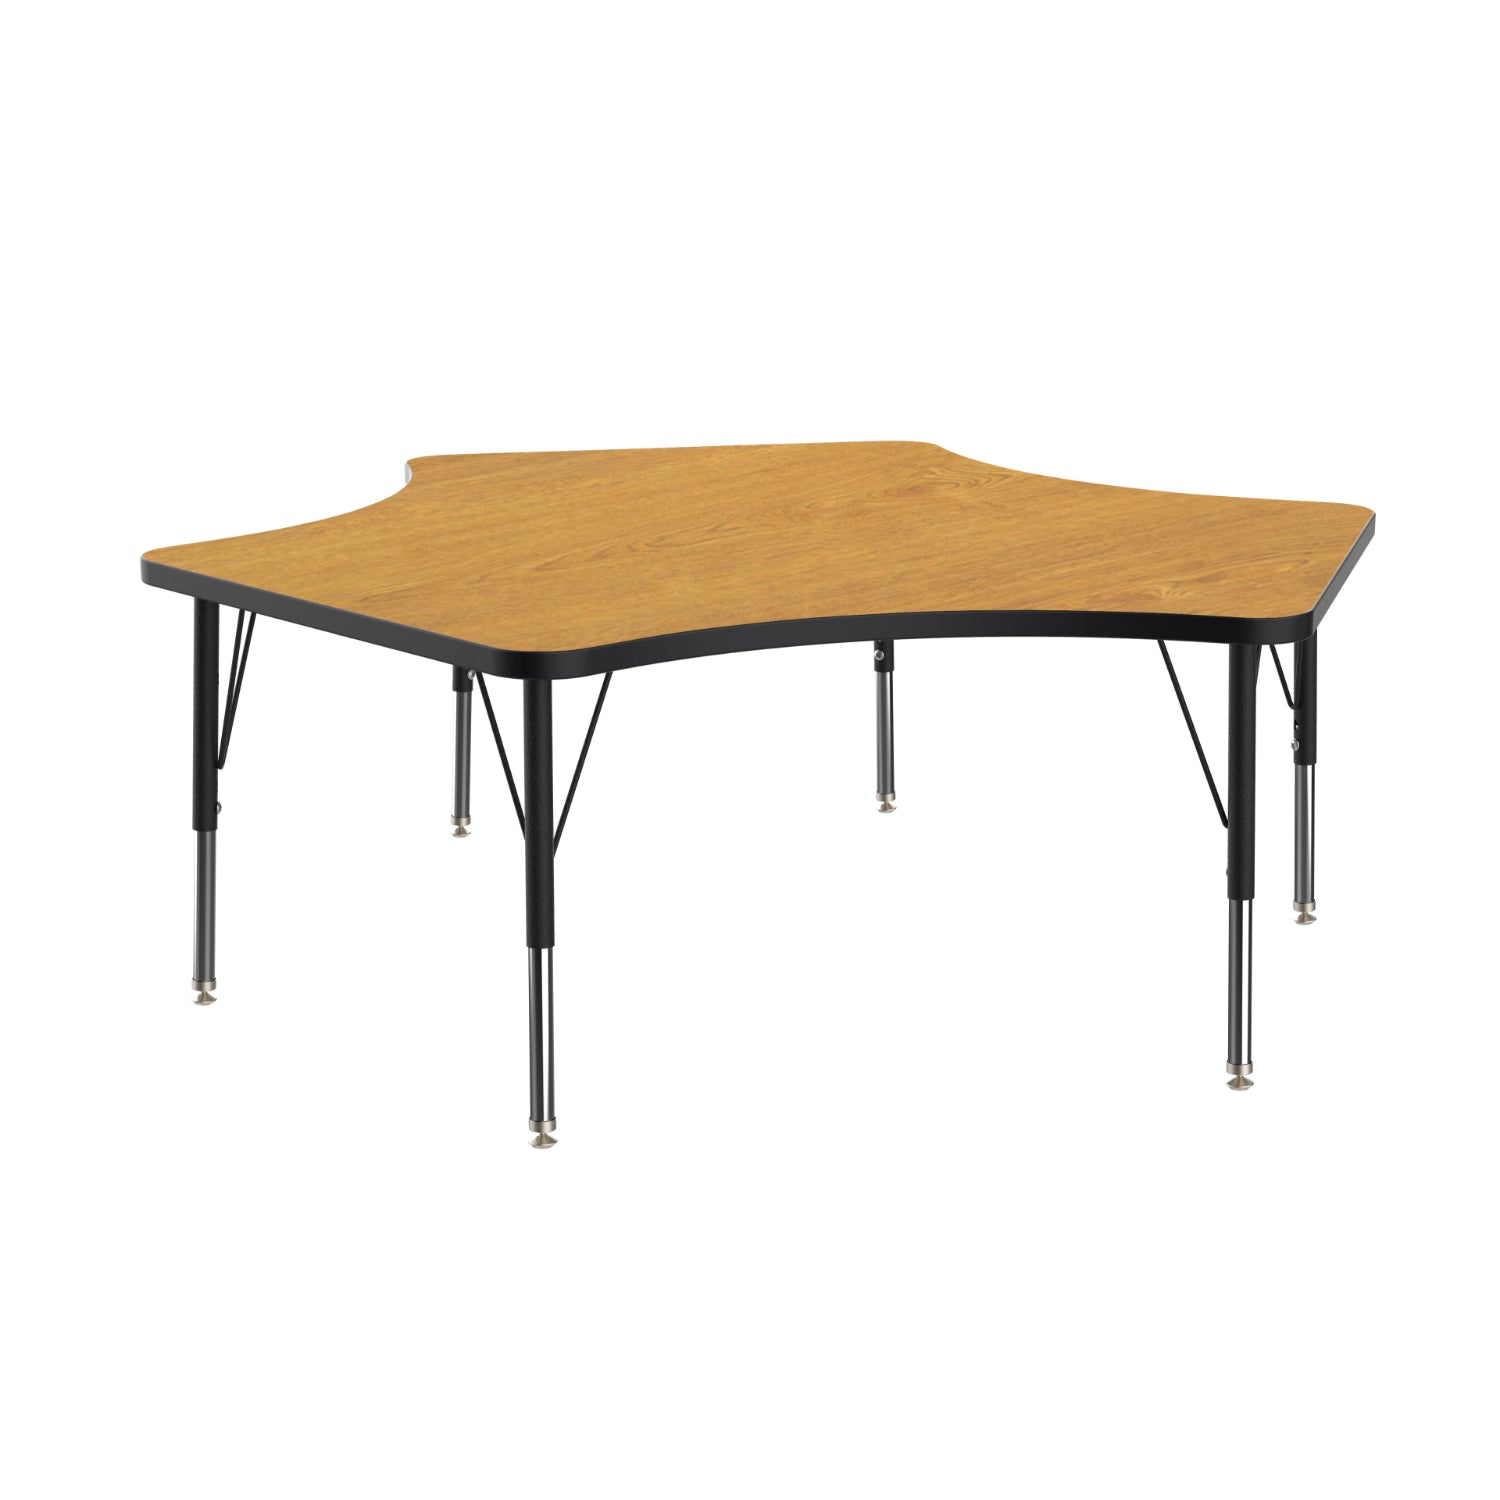 MG Series Adjustable Height Activity Table, 60" x 60" Delta